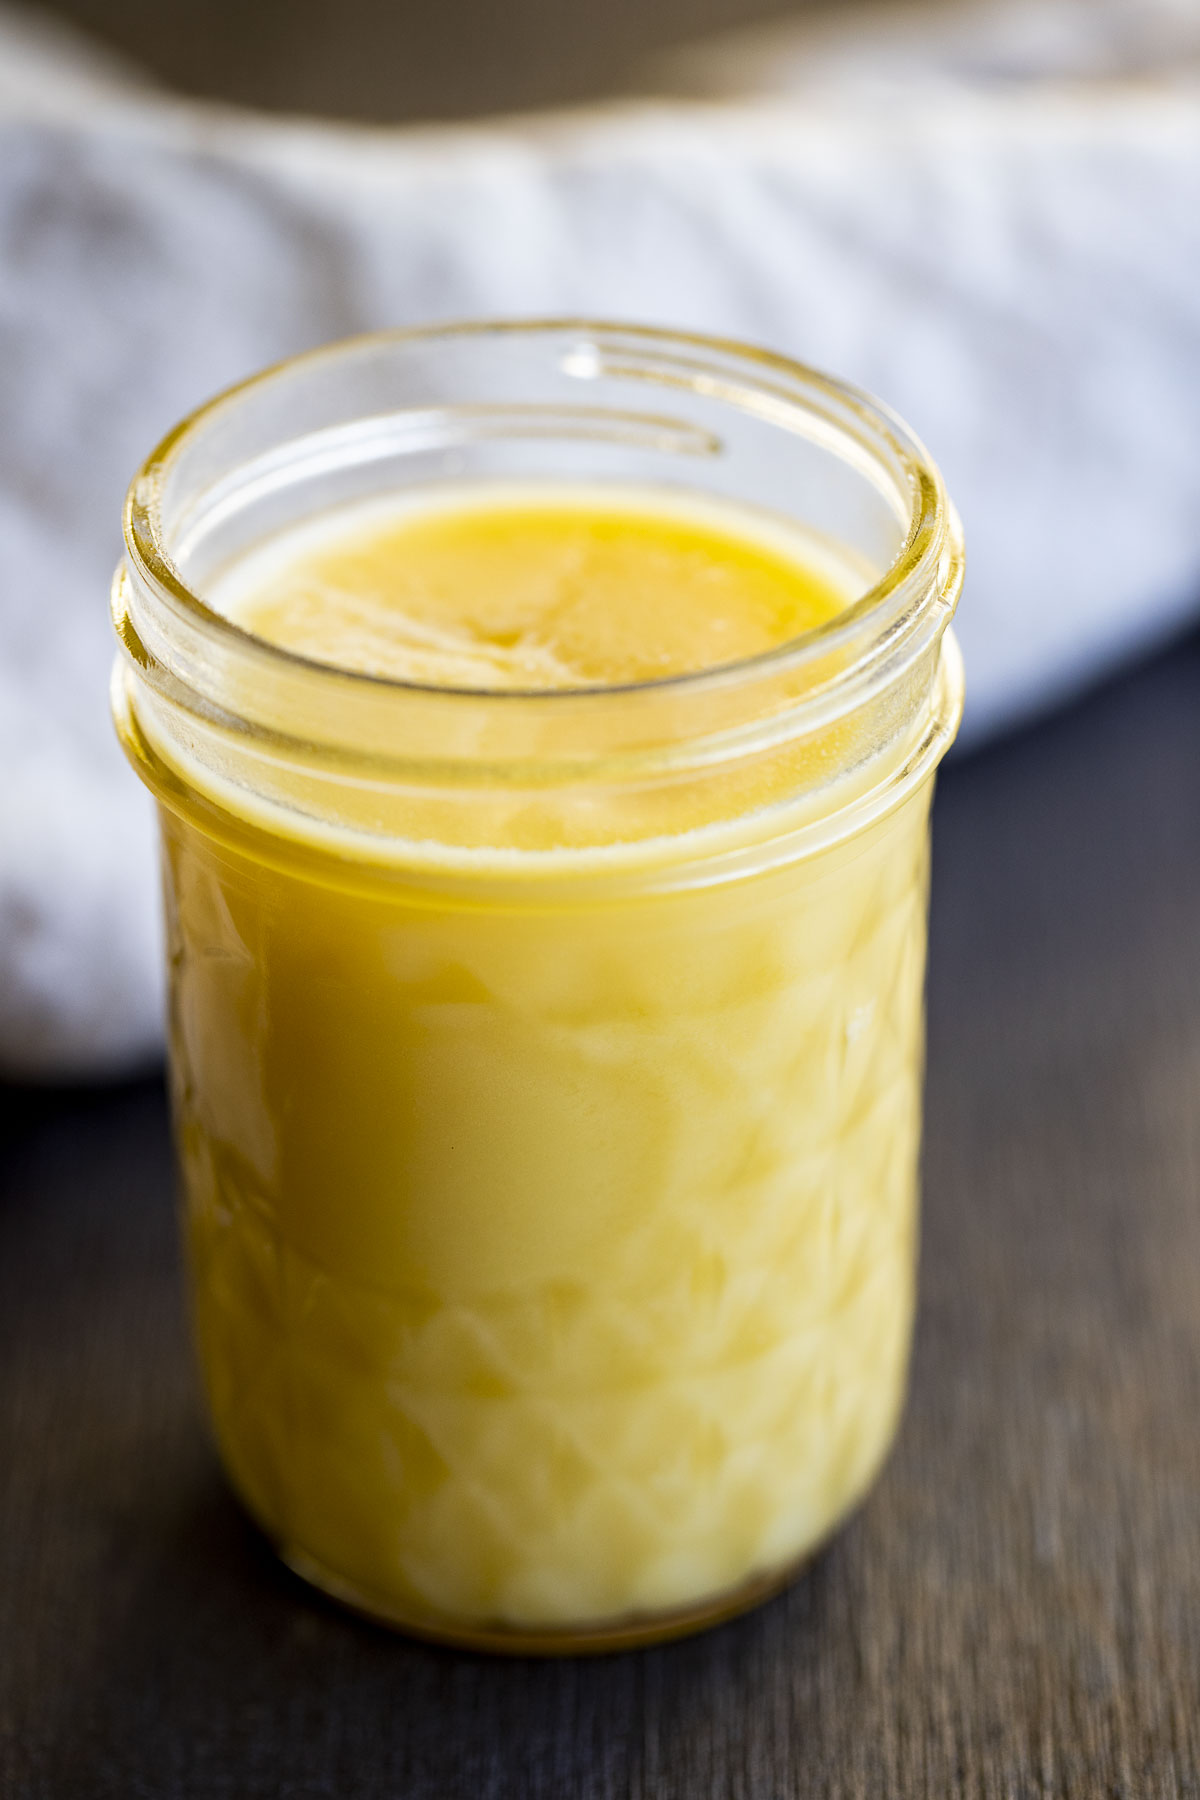 solid yellow ghee in a glass jar